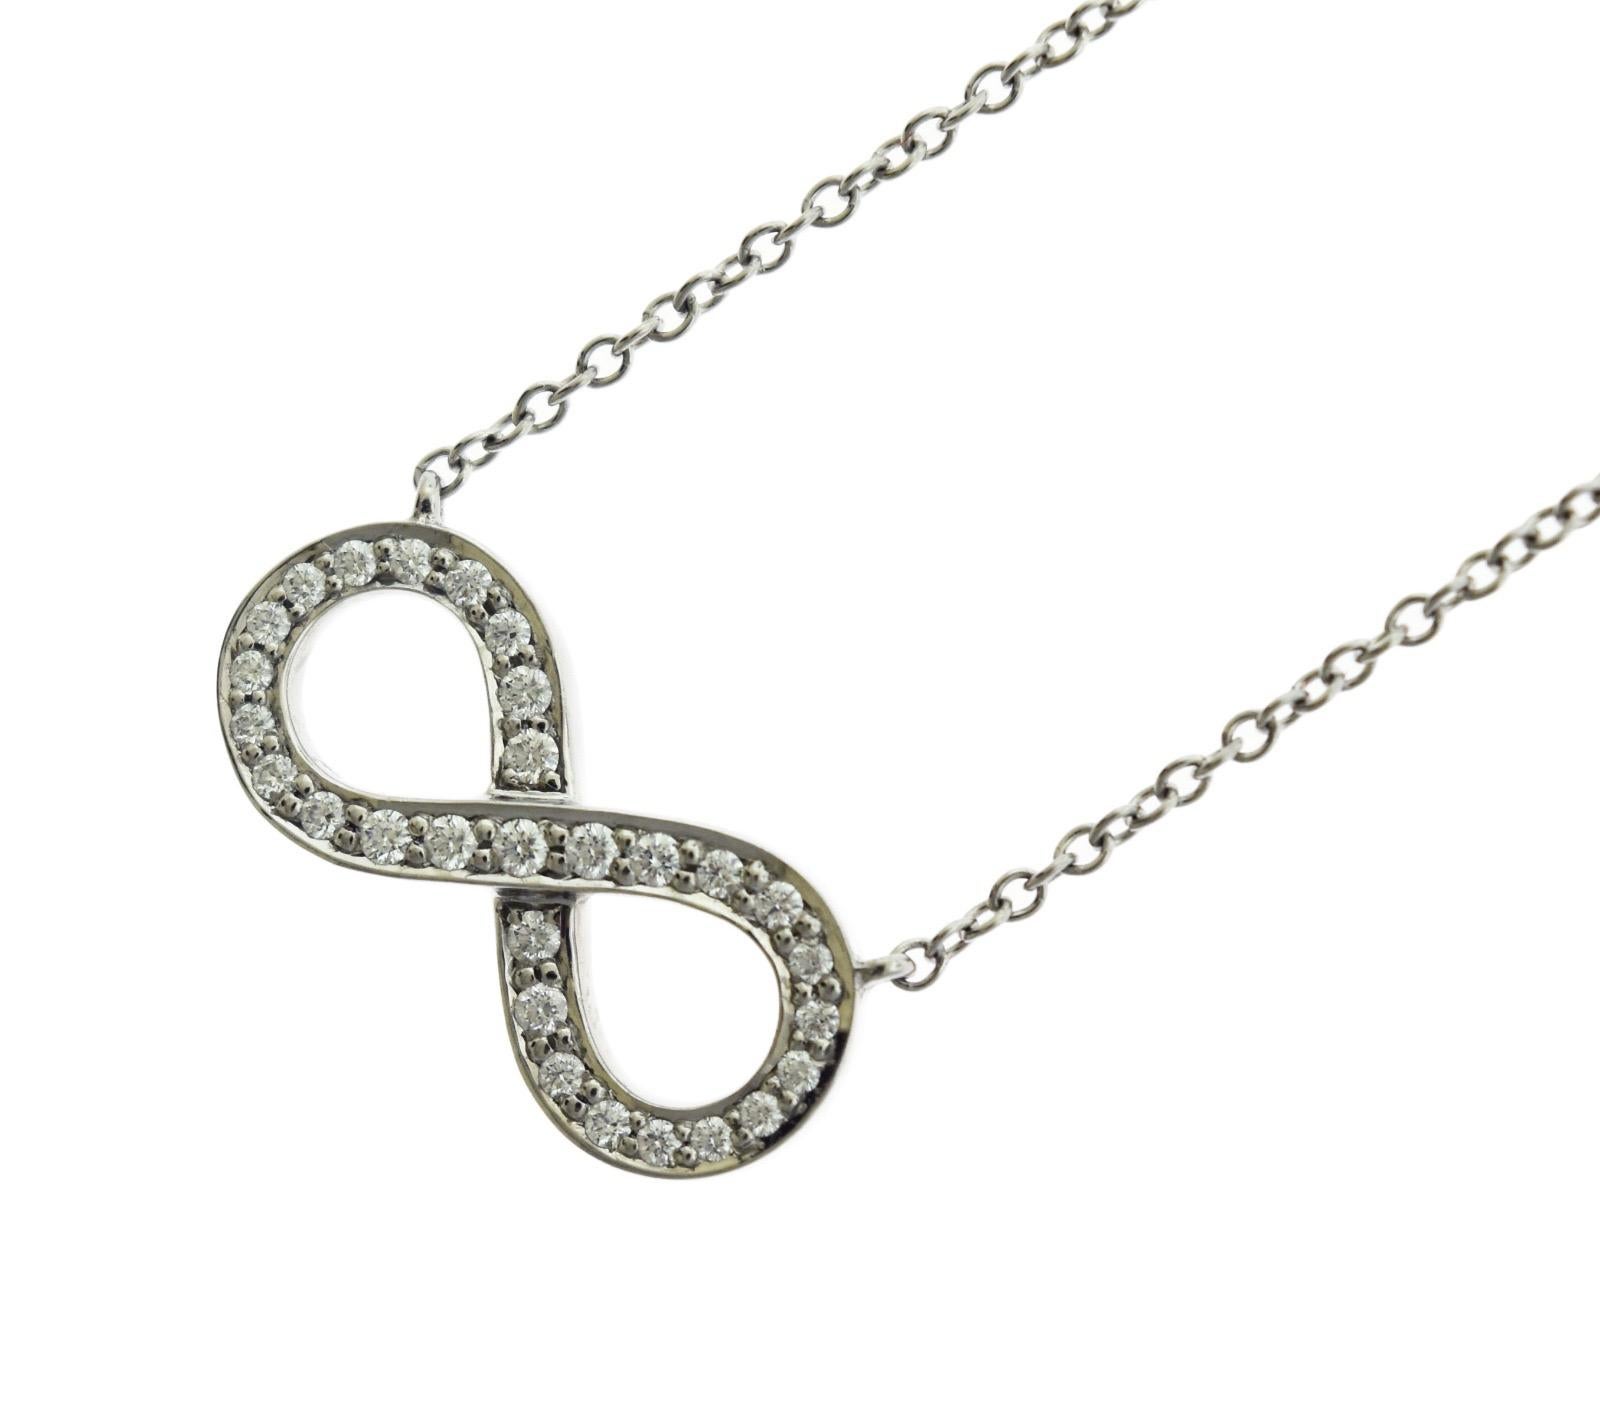 Brilliance Jewels, Miami
Questions? Call Us Anytime!
786,482,8100

Designer: Tiffany & Co.

Style: Pendant

Metal: Platinum 

Metal Purity: 950

Necklace Length: 16 inches

Pendant Size:  16.95 mm 

Total Item Weight (grams): 3.6 g

Total Carat 